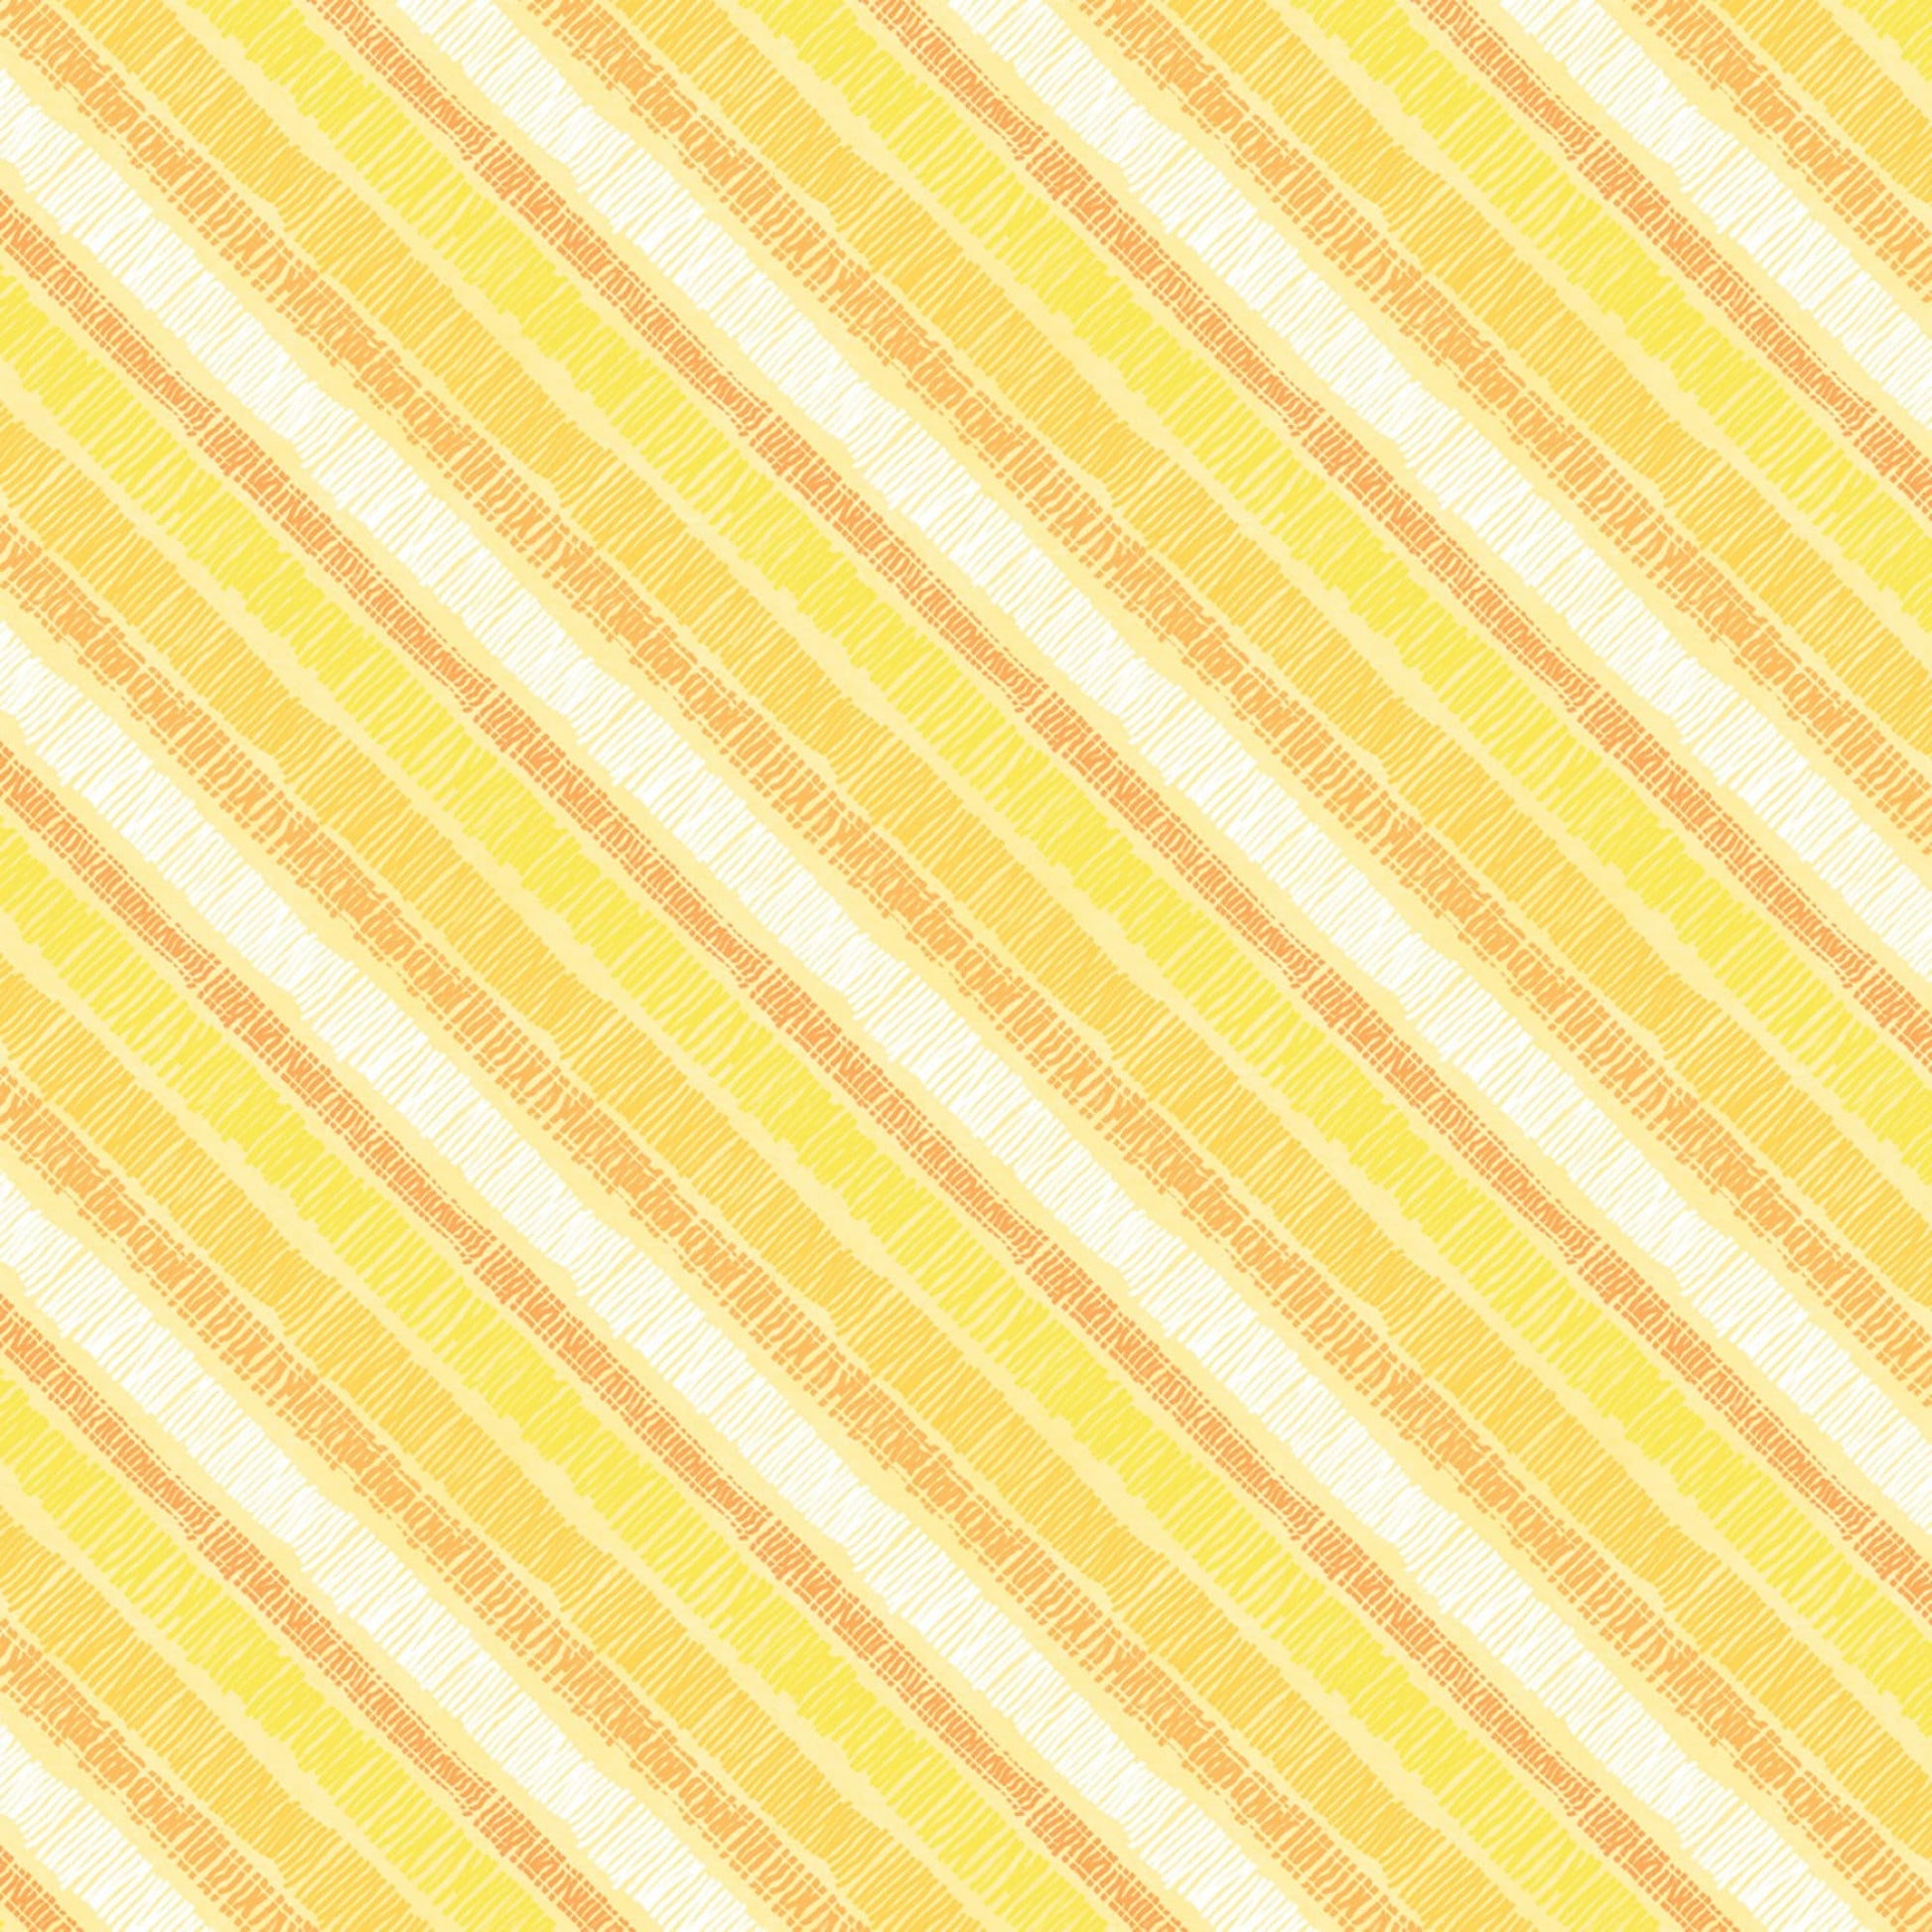 Wilmington Prints Yellow / FQ (18"x21") Diagonal Stripe Teal or Diagonal Stripe Yellow Fabric by the Yard from Wilmington Prints Sunflower Sweet by Lisa Audit